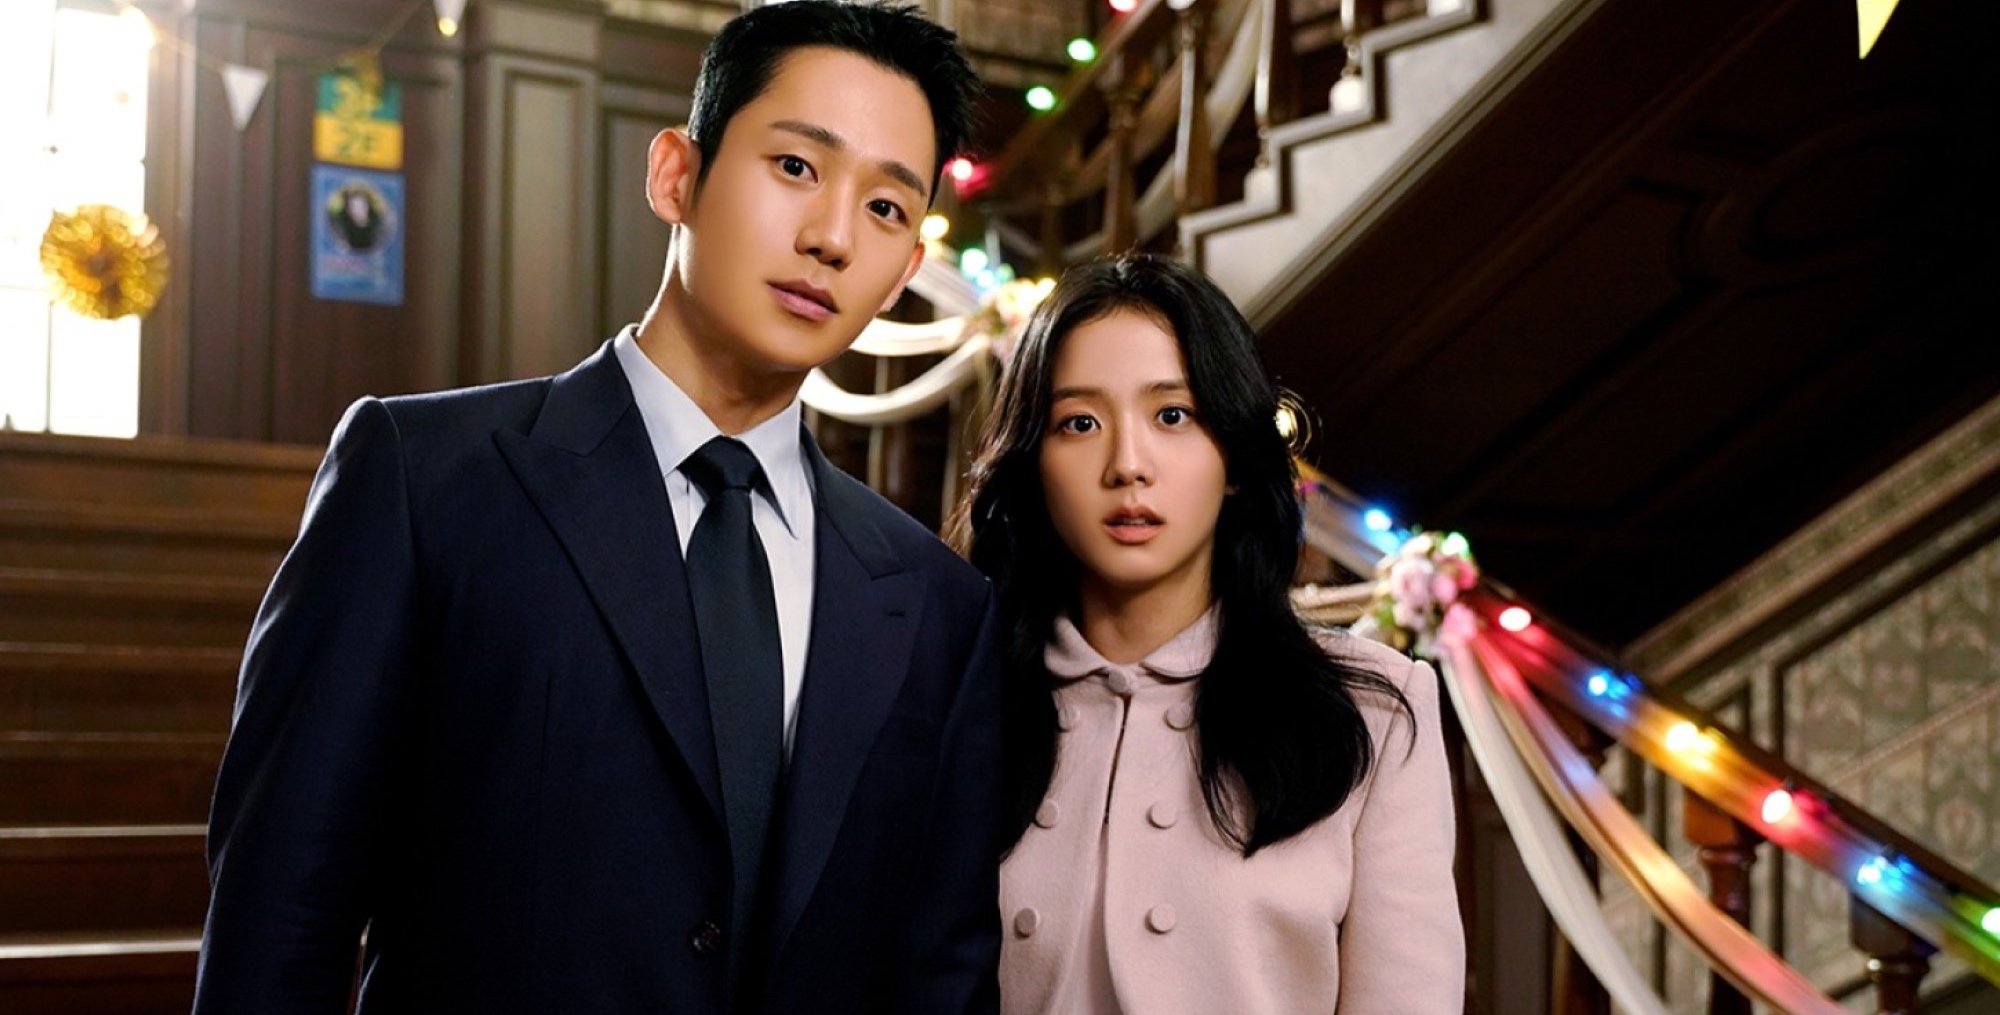 'Snowdrop' characters Soo-ho and Young-ro in North-South Korea romance K-drama wearing suit and pink dress.